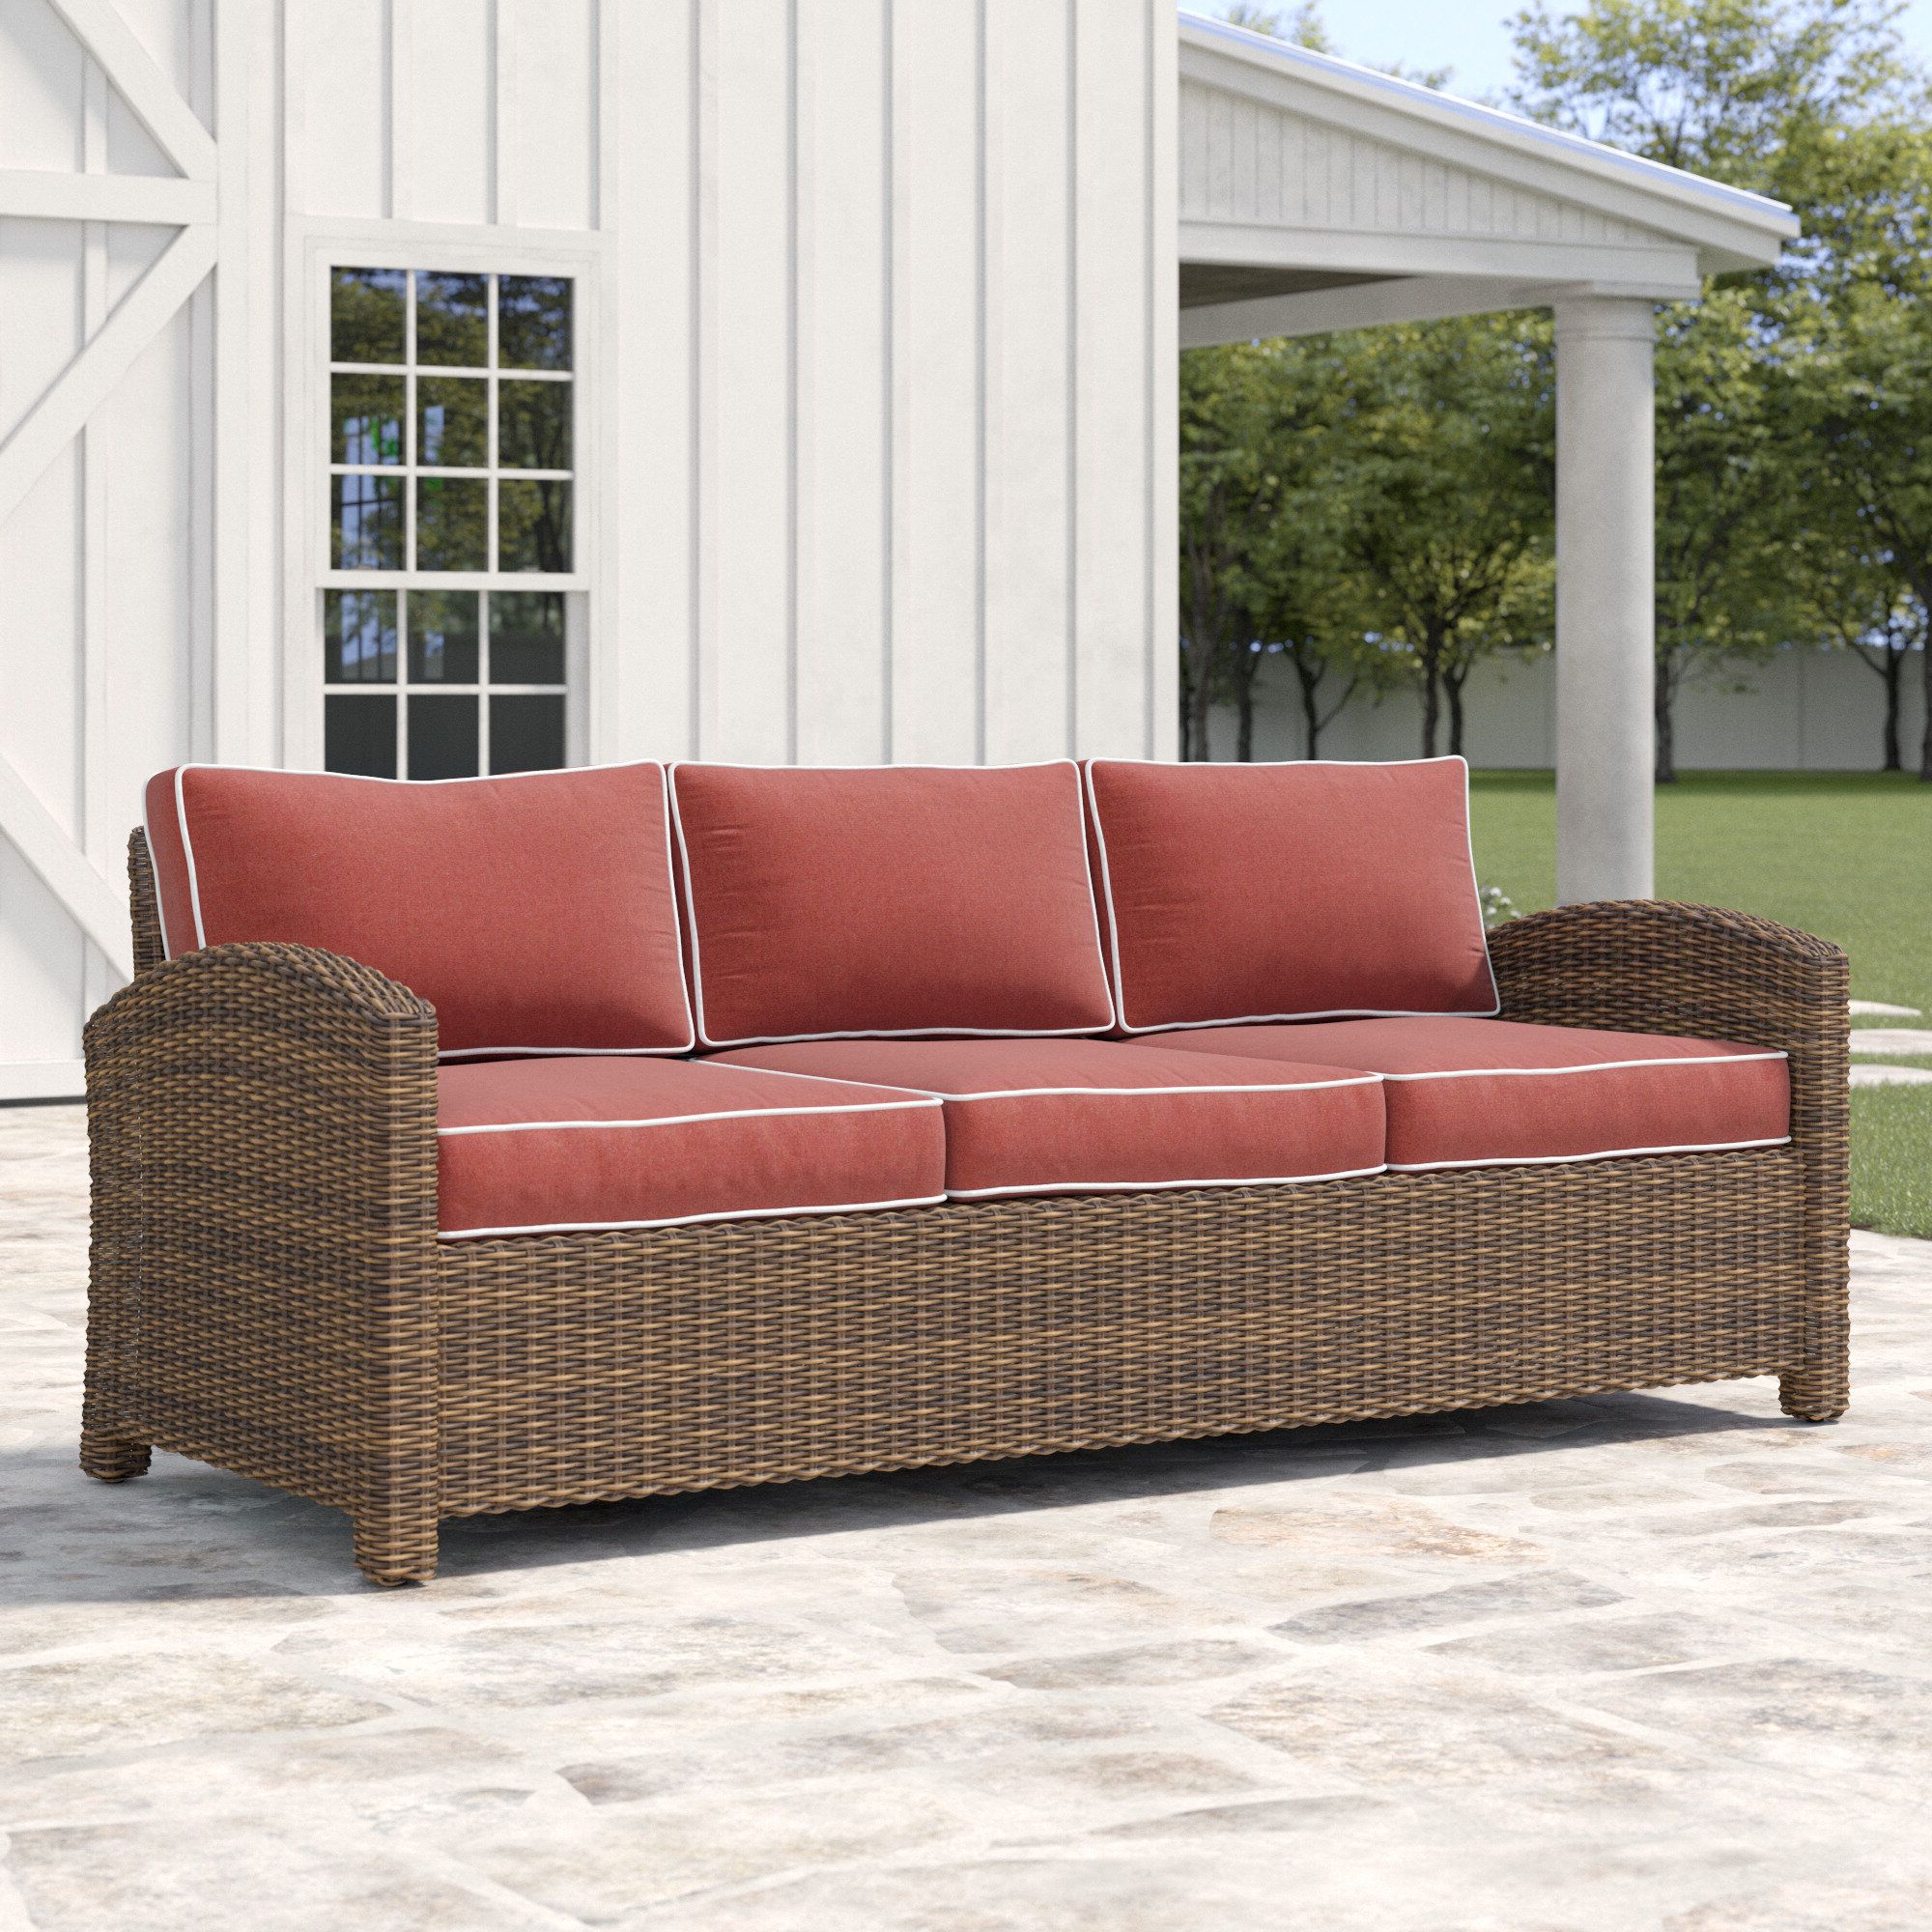 Lawson Wicker Loveseats With Cushions With Regard To 2020 Lawson Patio Sofa With Cushions (View 10 of 25)